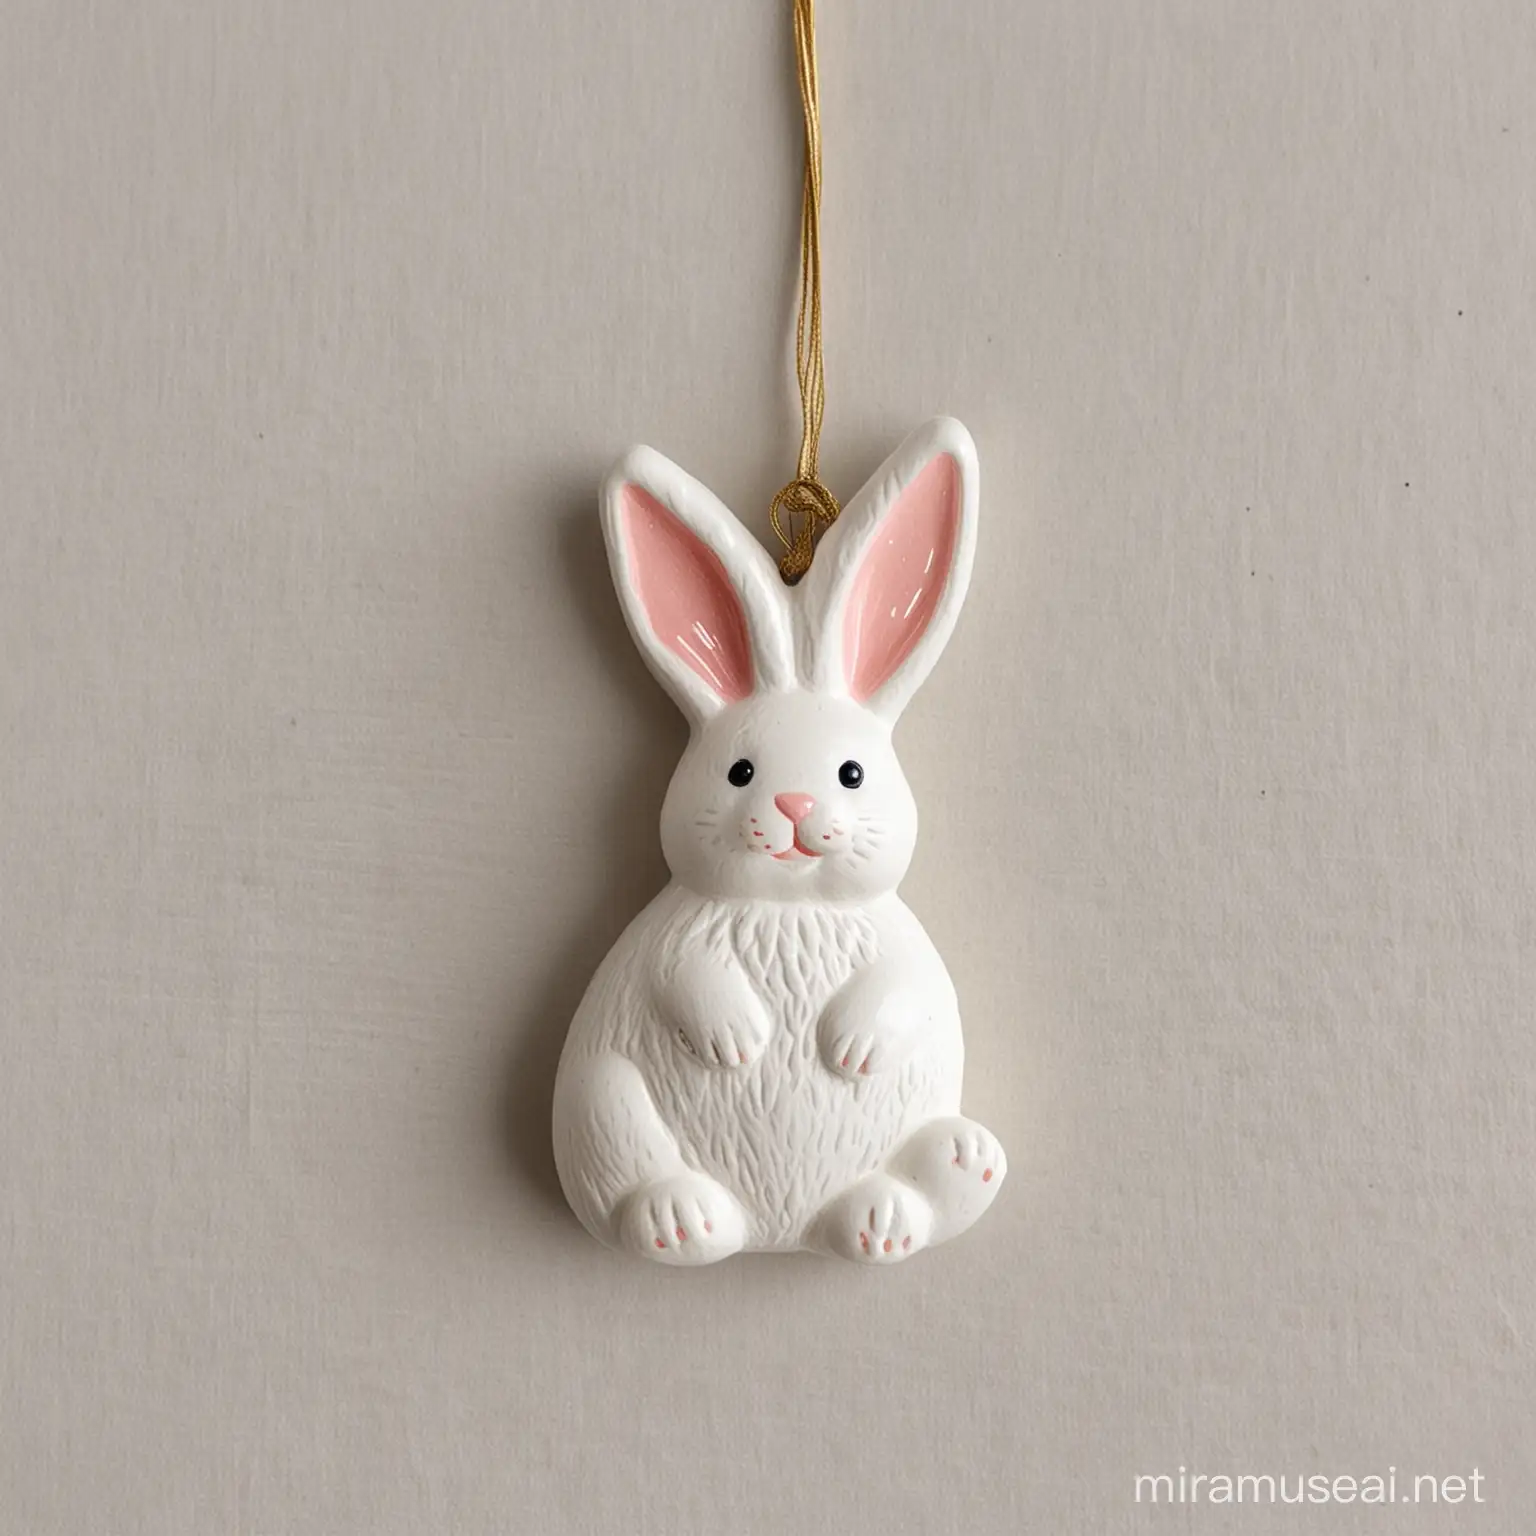 Adorable Easter Bunny Ceramic Ornament on Pure White Background